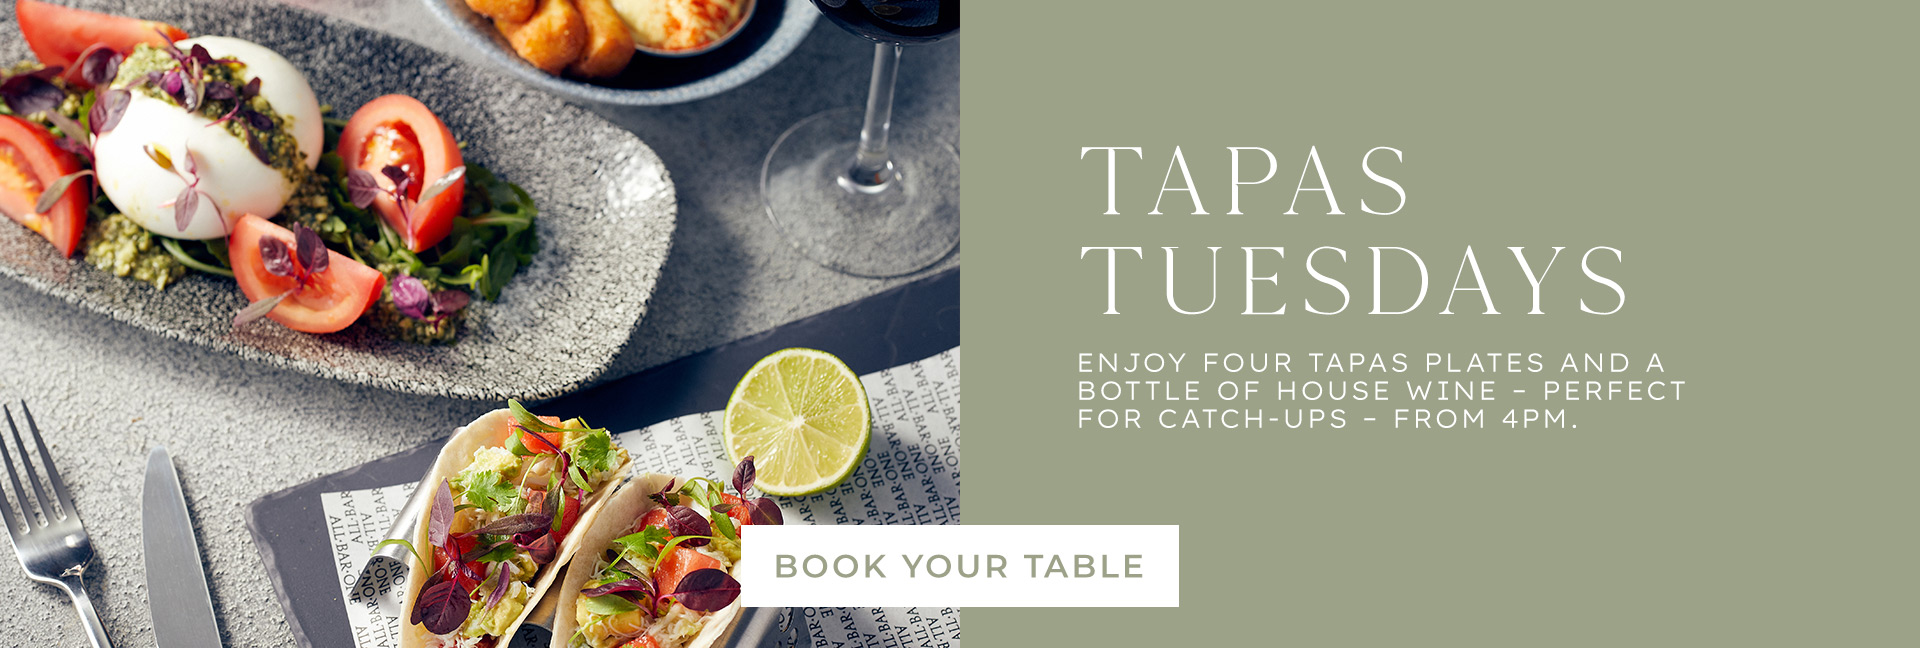 Tapas Tuesday at All Bar One Appold Street - Book now